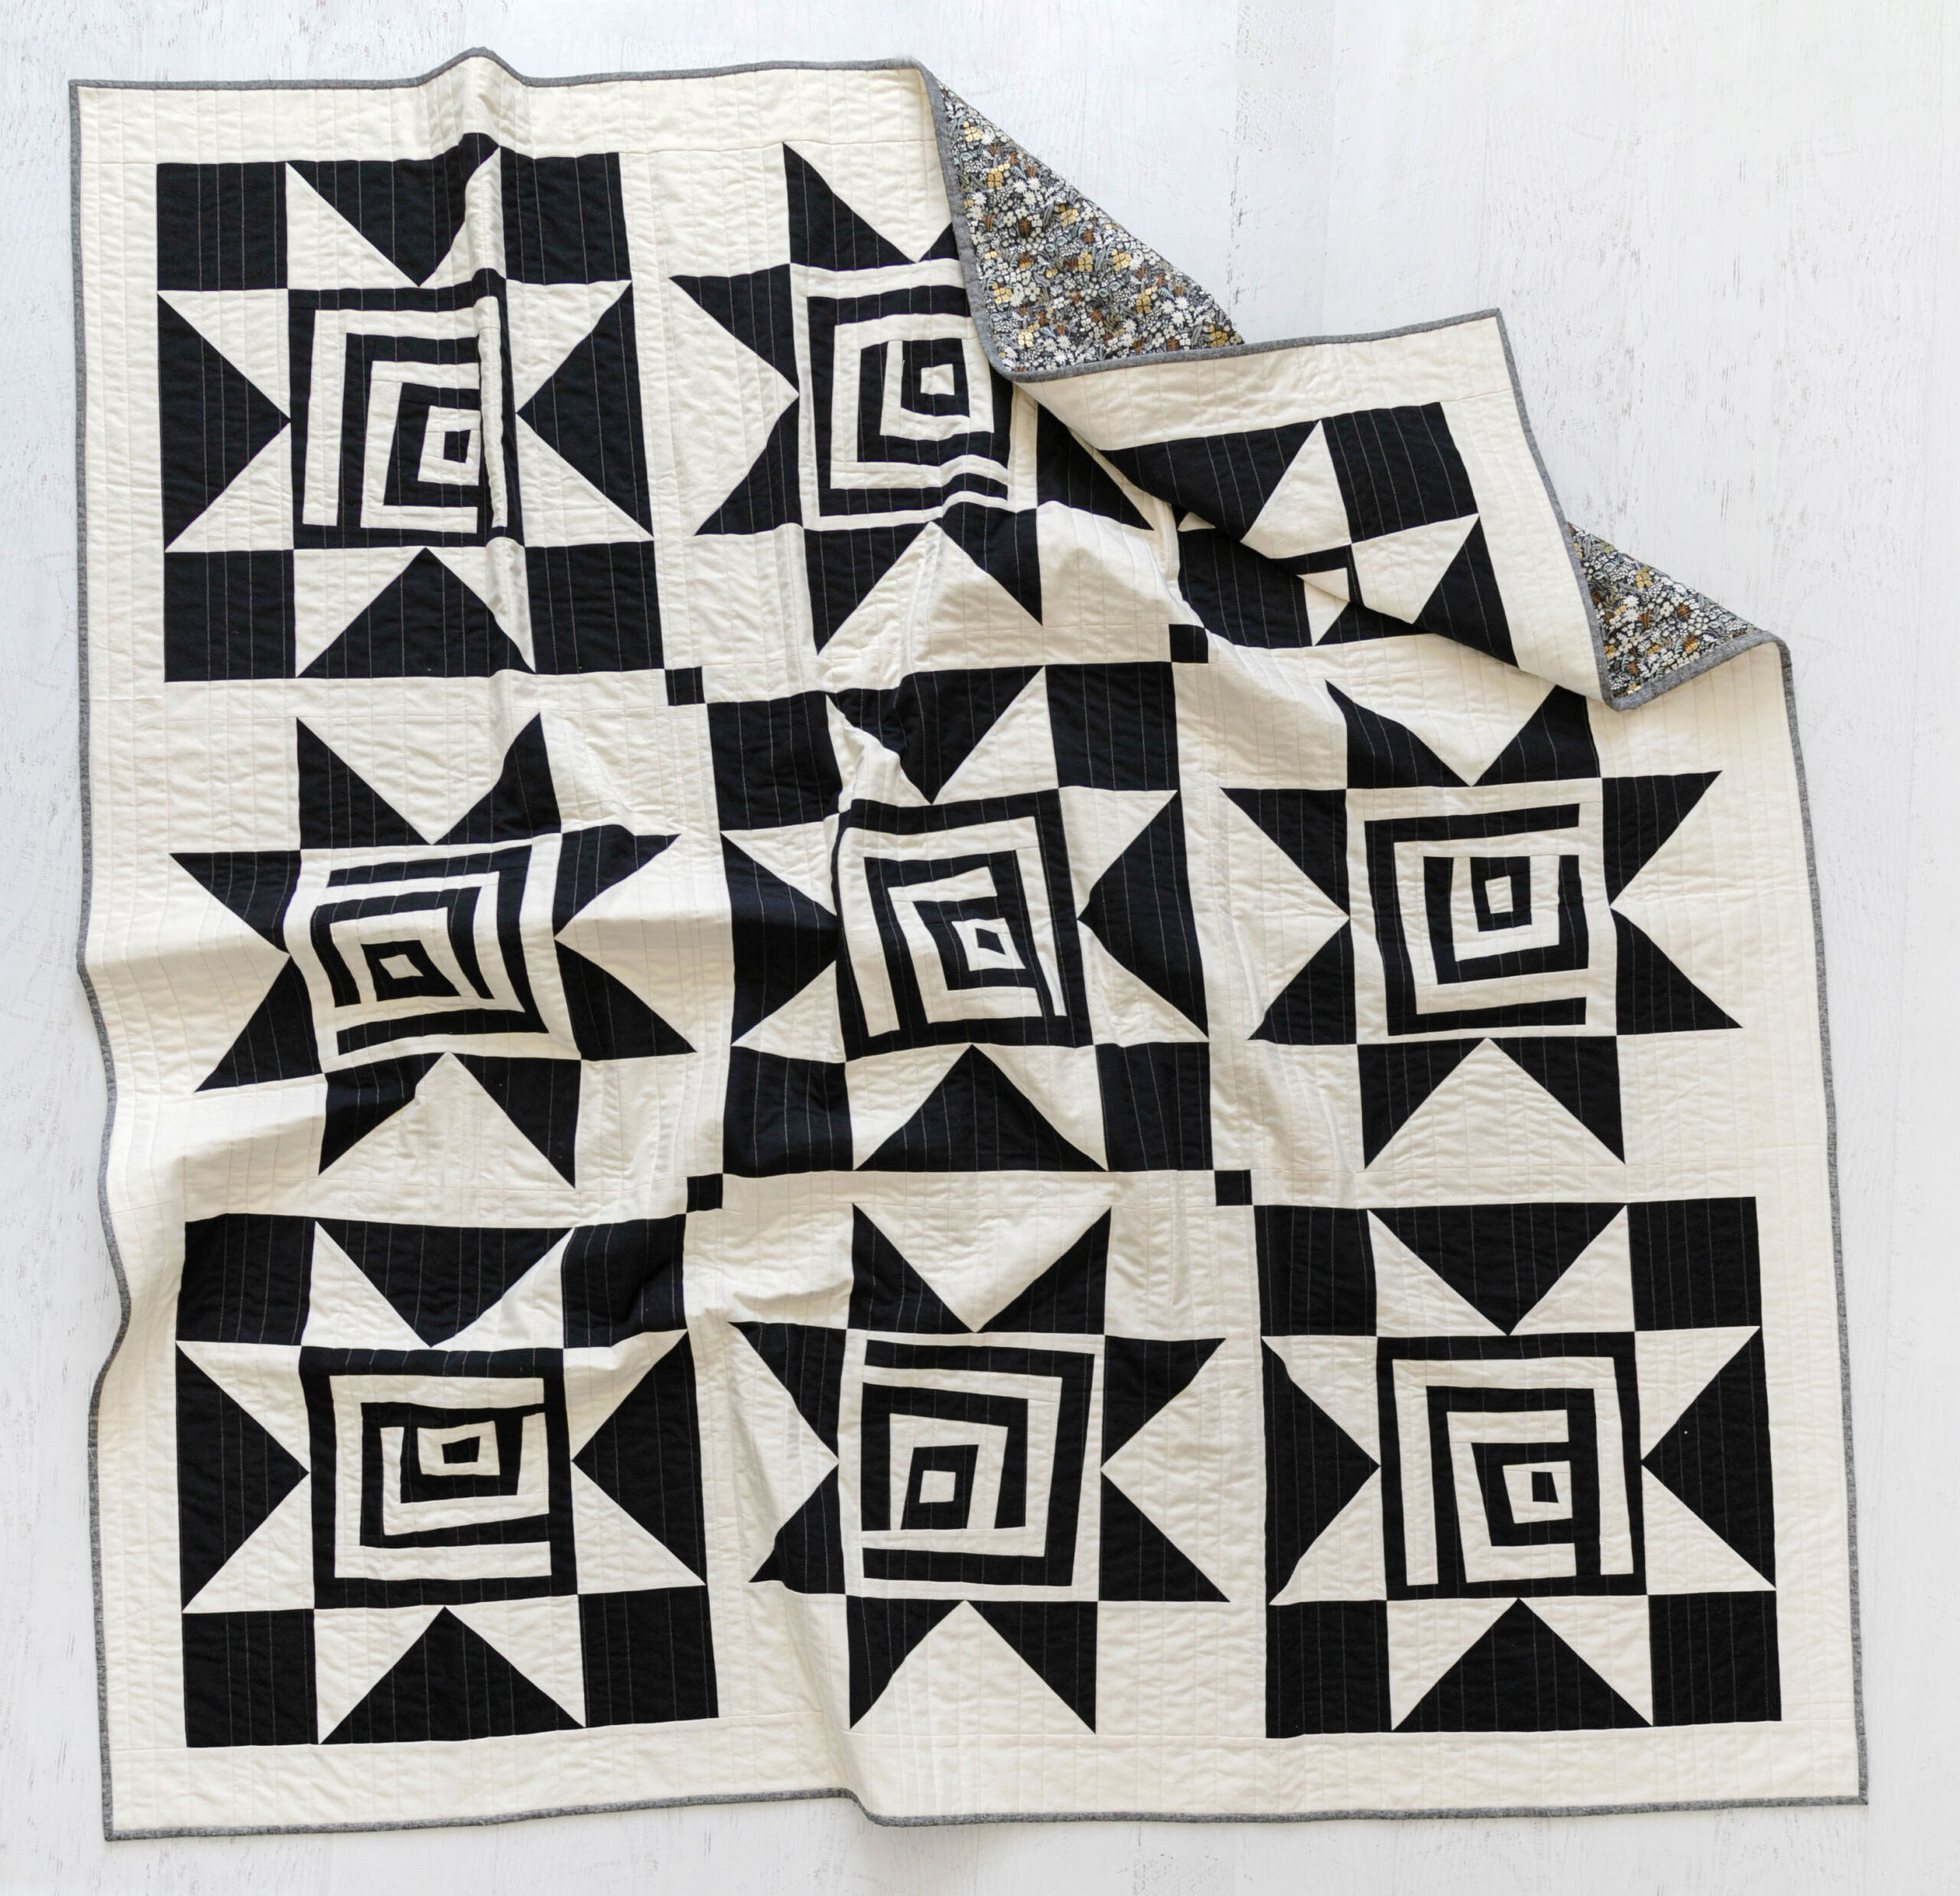 Get inspired to try lush and rich shot cottons on your Shining Star quilt! #quilting #sewingdiy suzyquilts.com